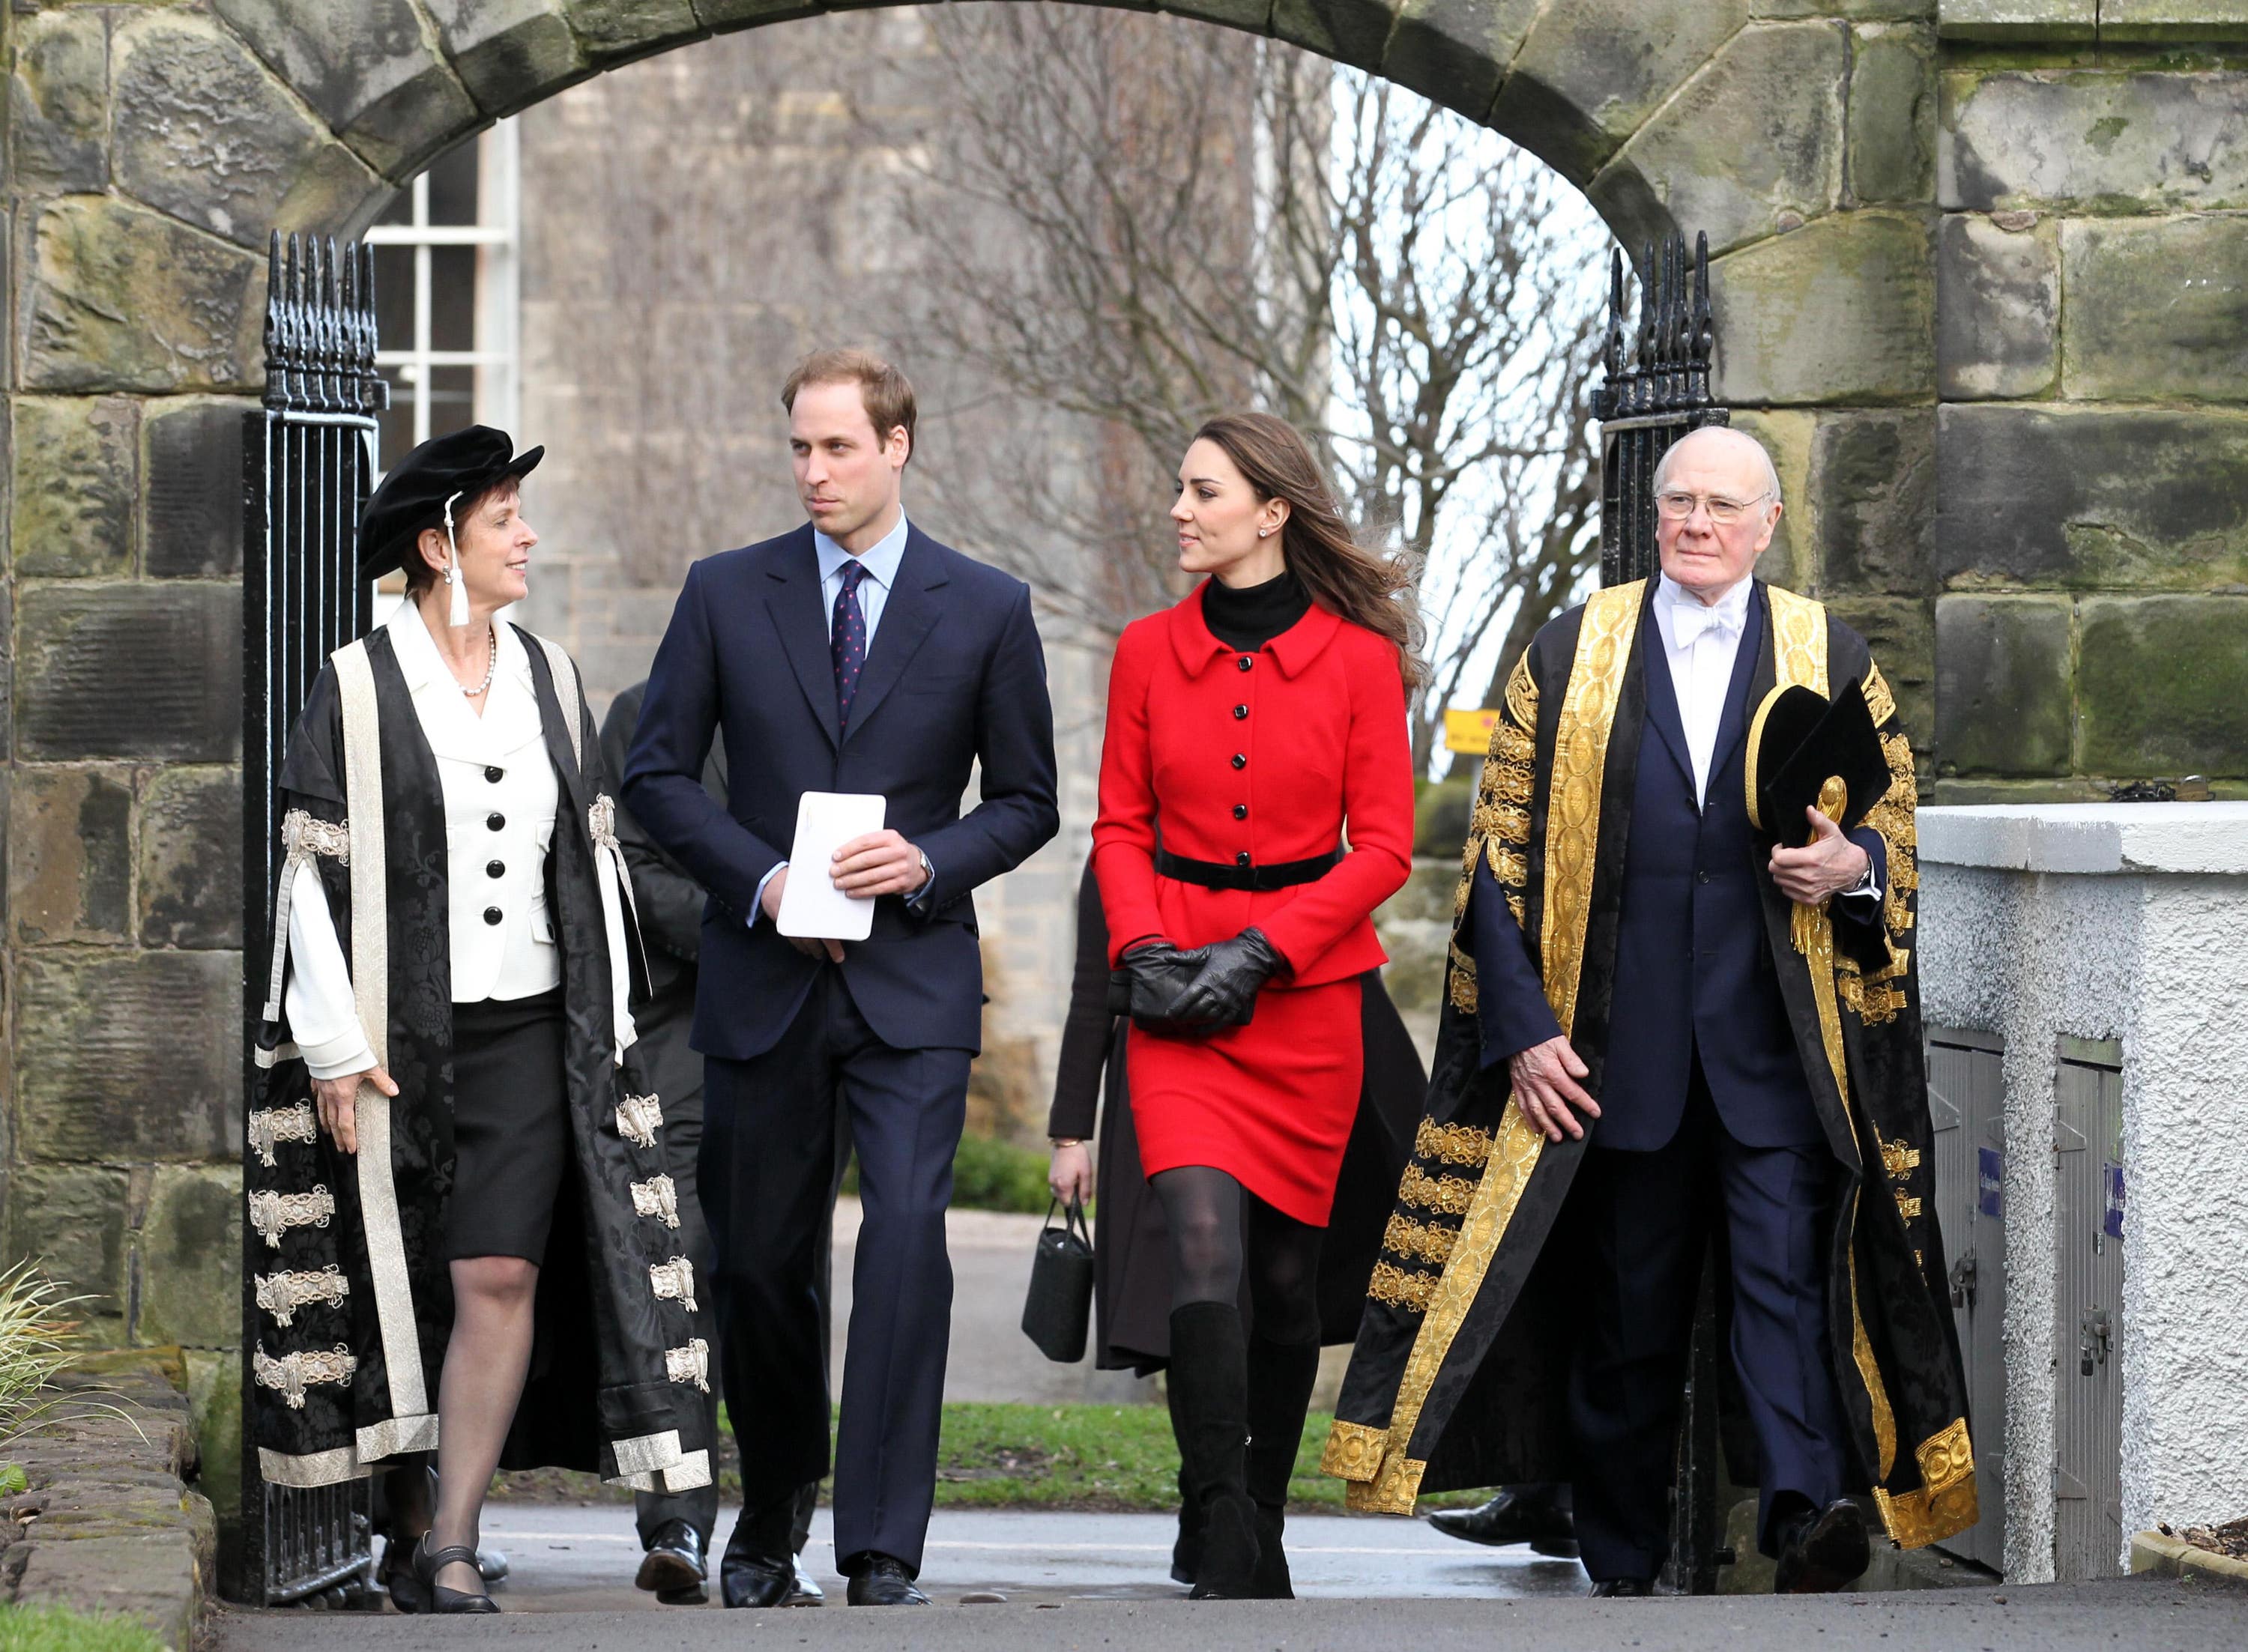 William and Kate did a walkabout on the streets they frequented as students on their return visit (Owen Humphreys/PA)